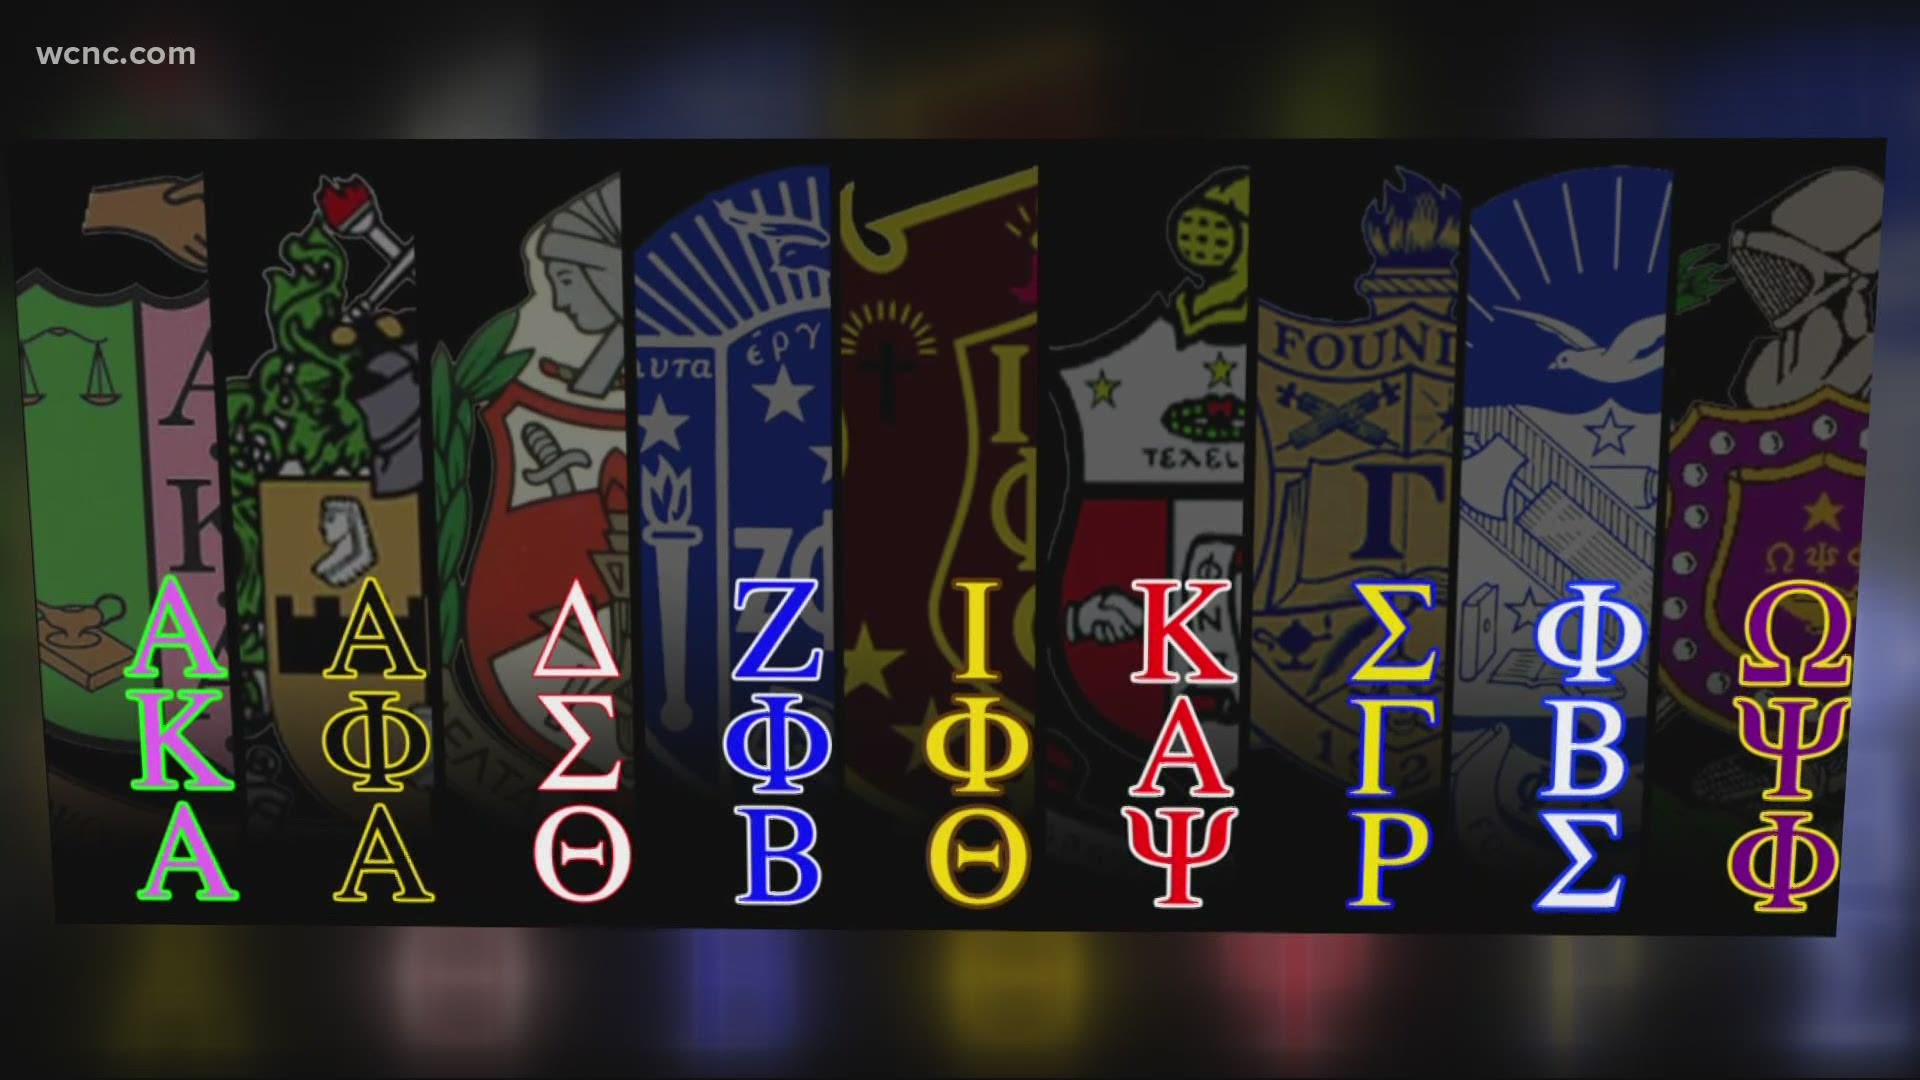 Black Greek letter organizations date back to the early 1900s.